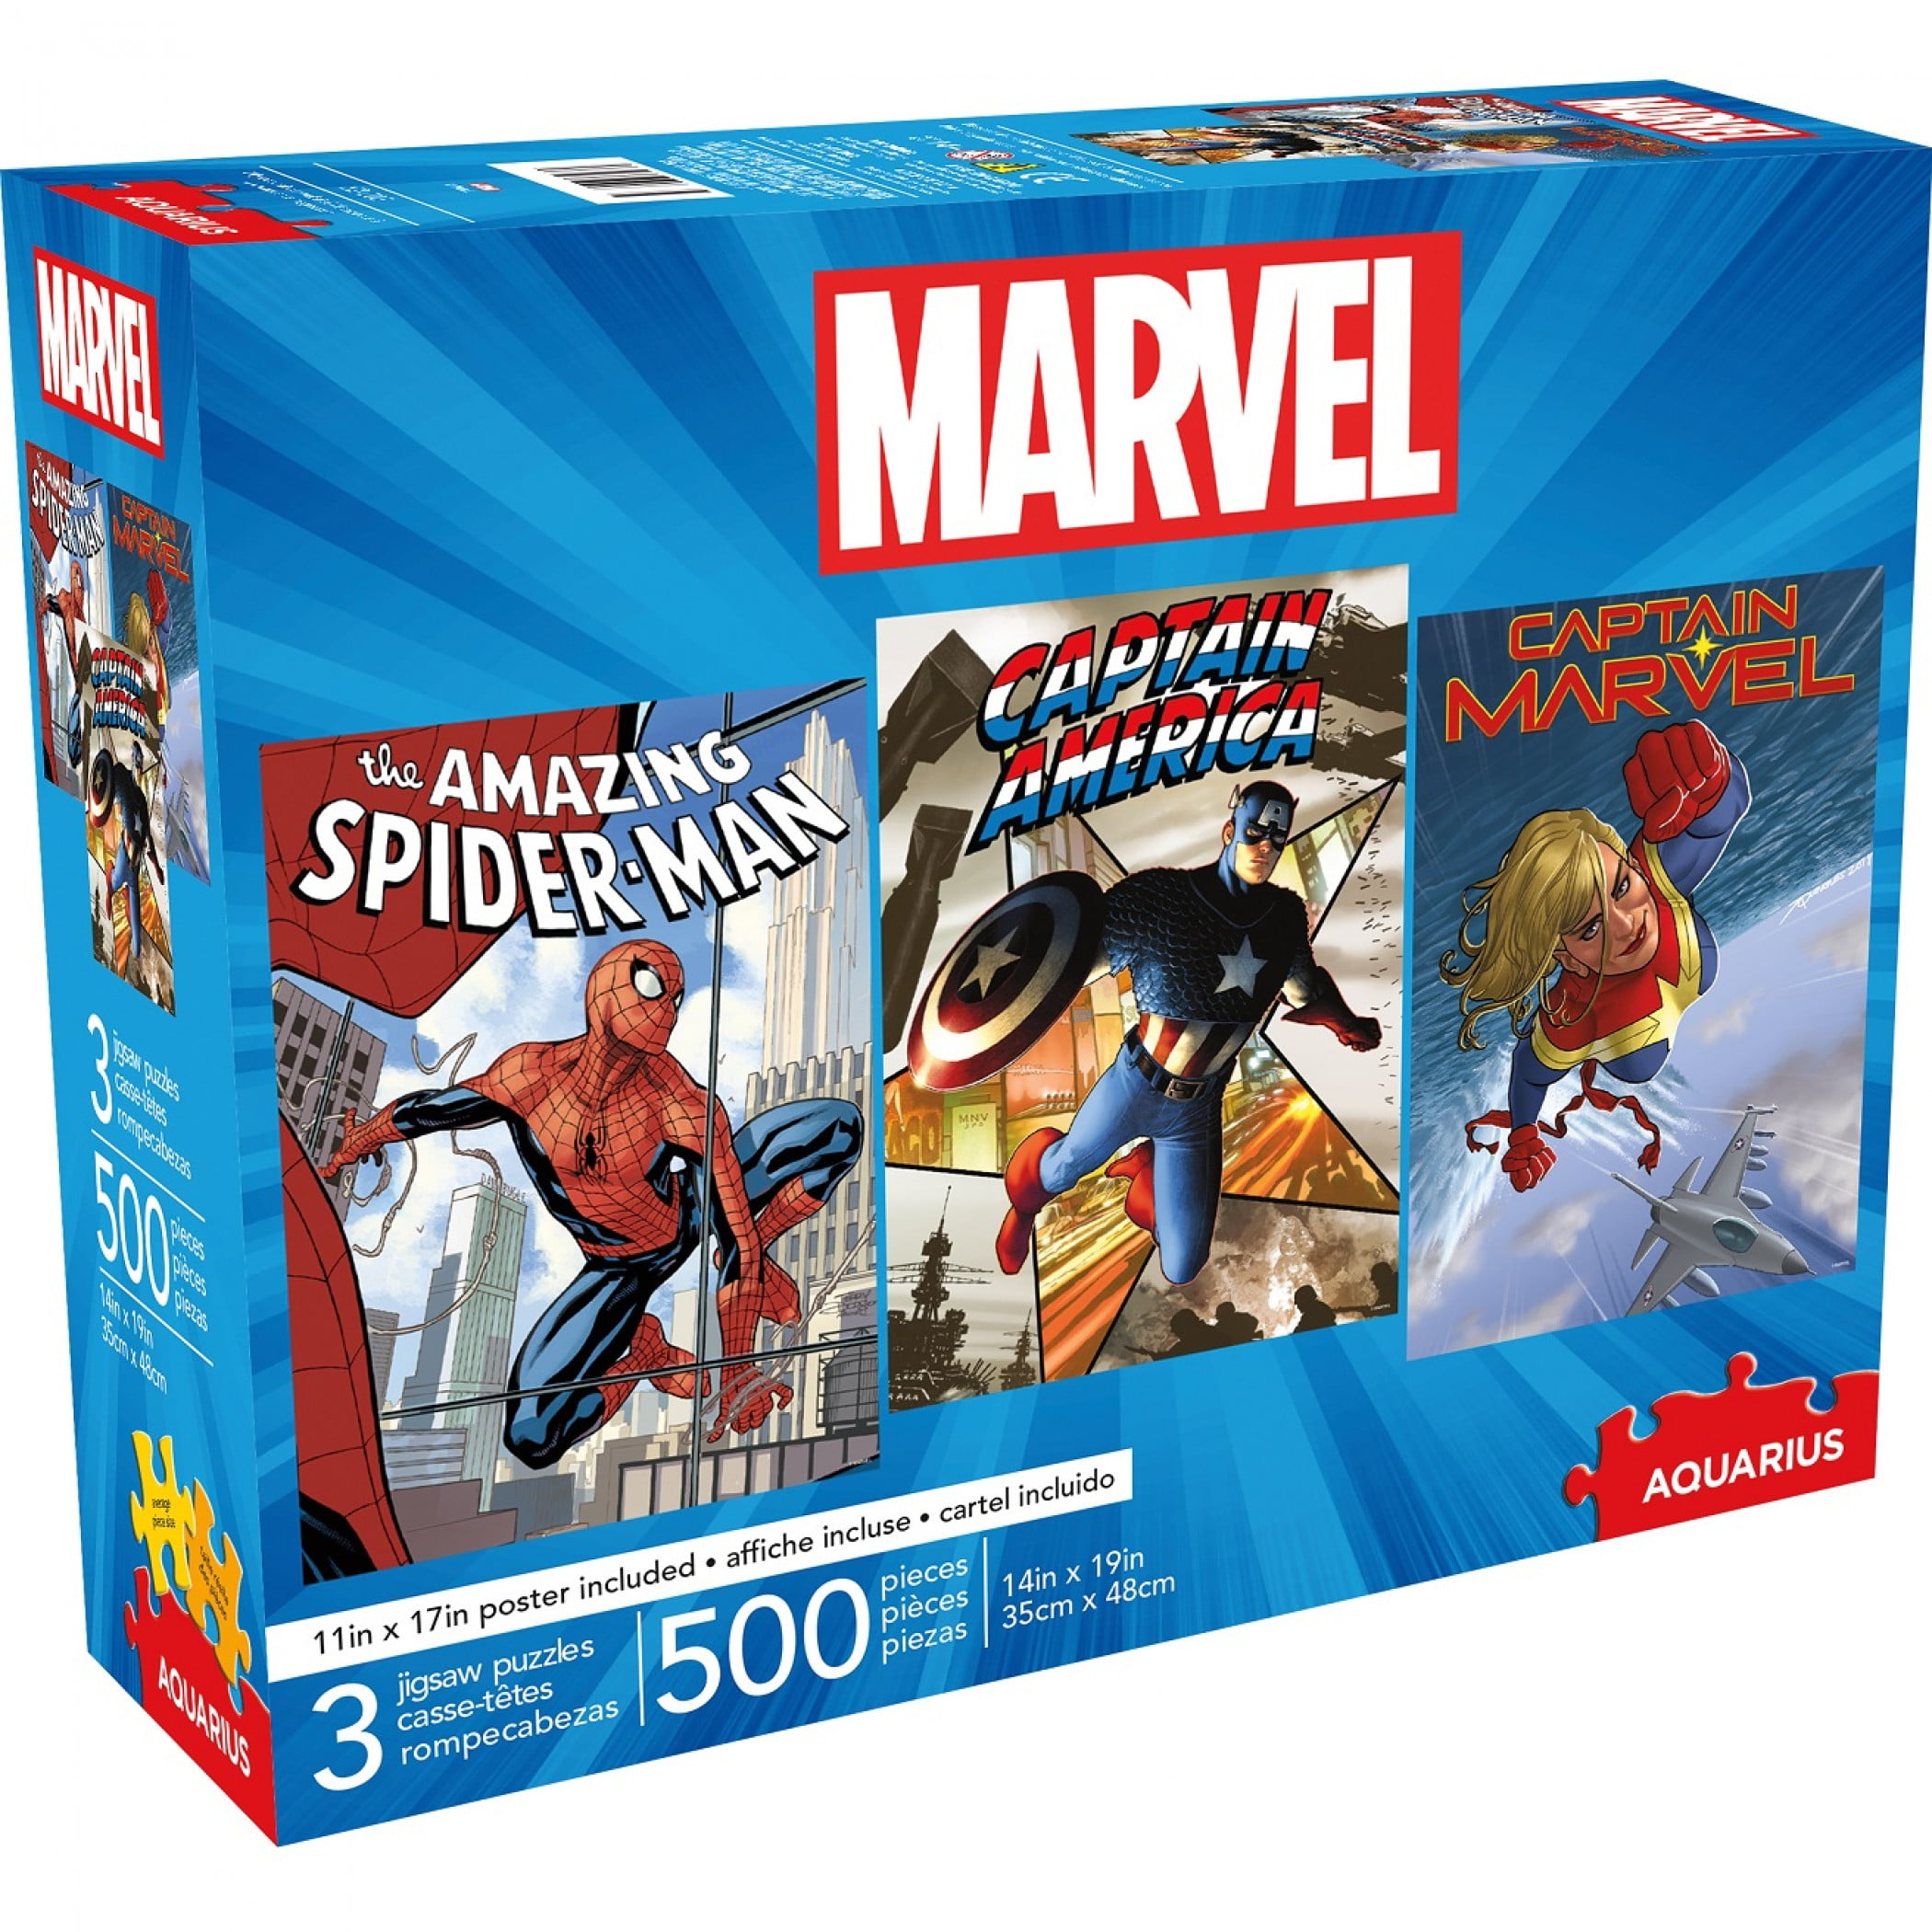 Details about   Marvel Superhero Adventures 5 Wood Puzzles My First Marvels Box Set NEW 